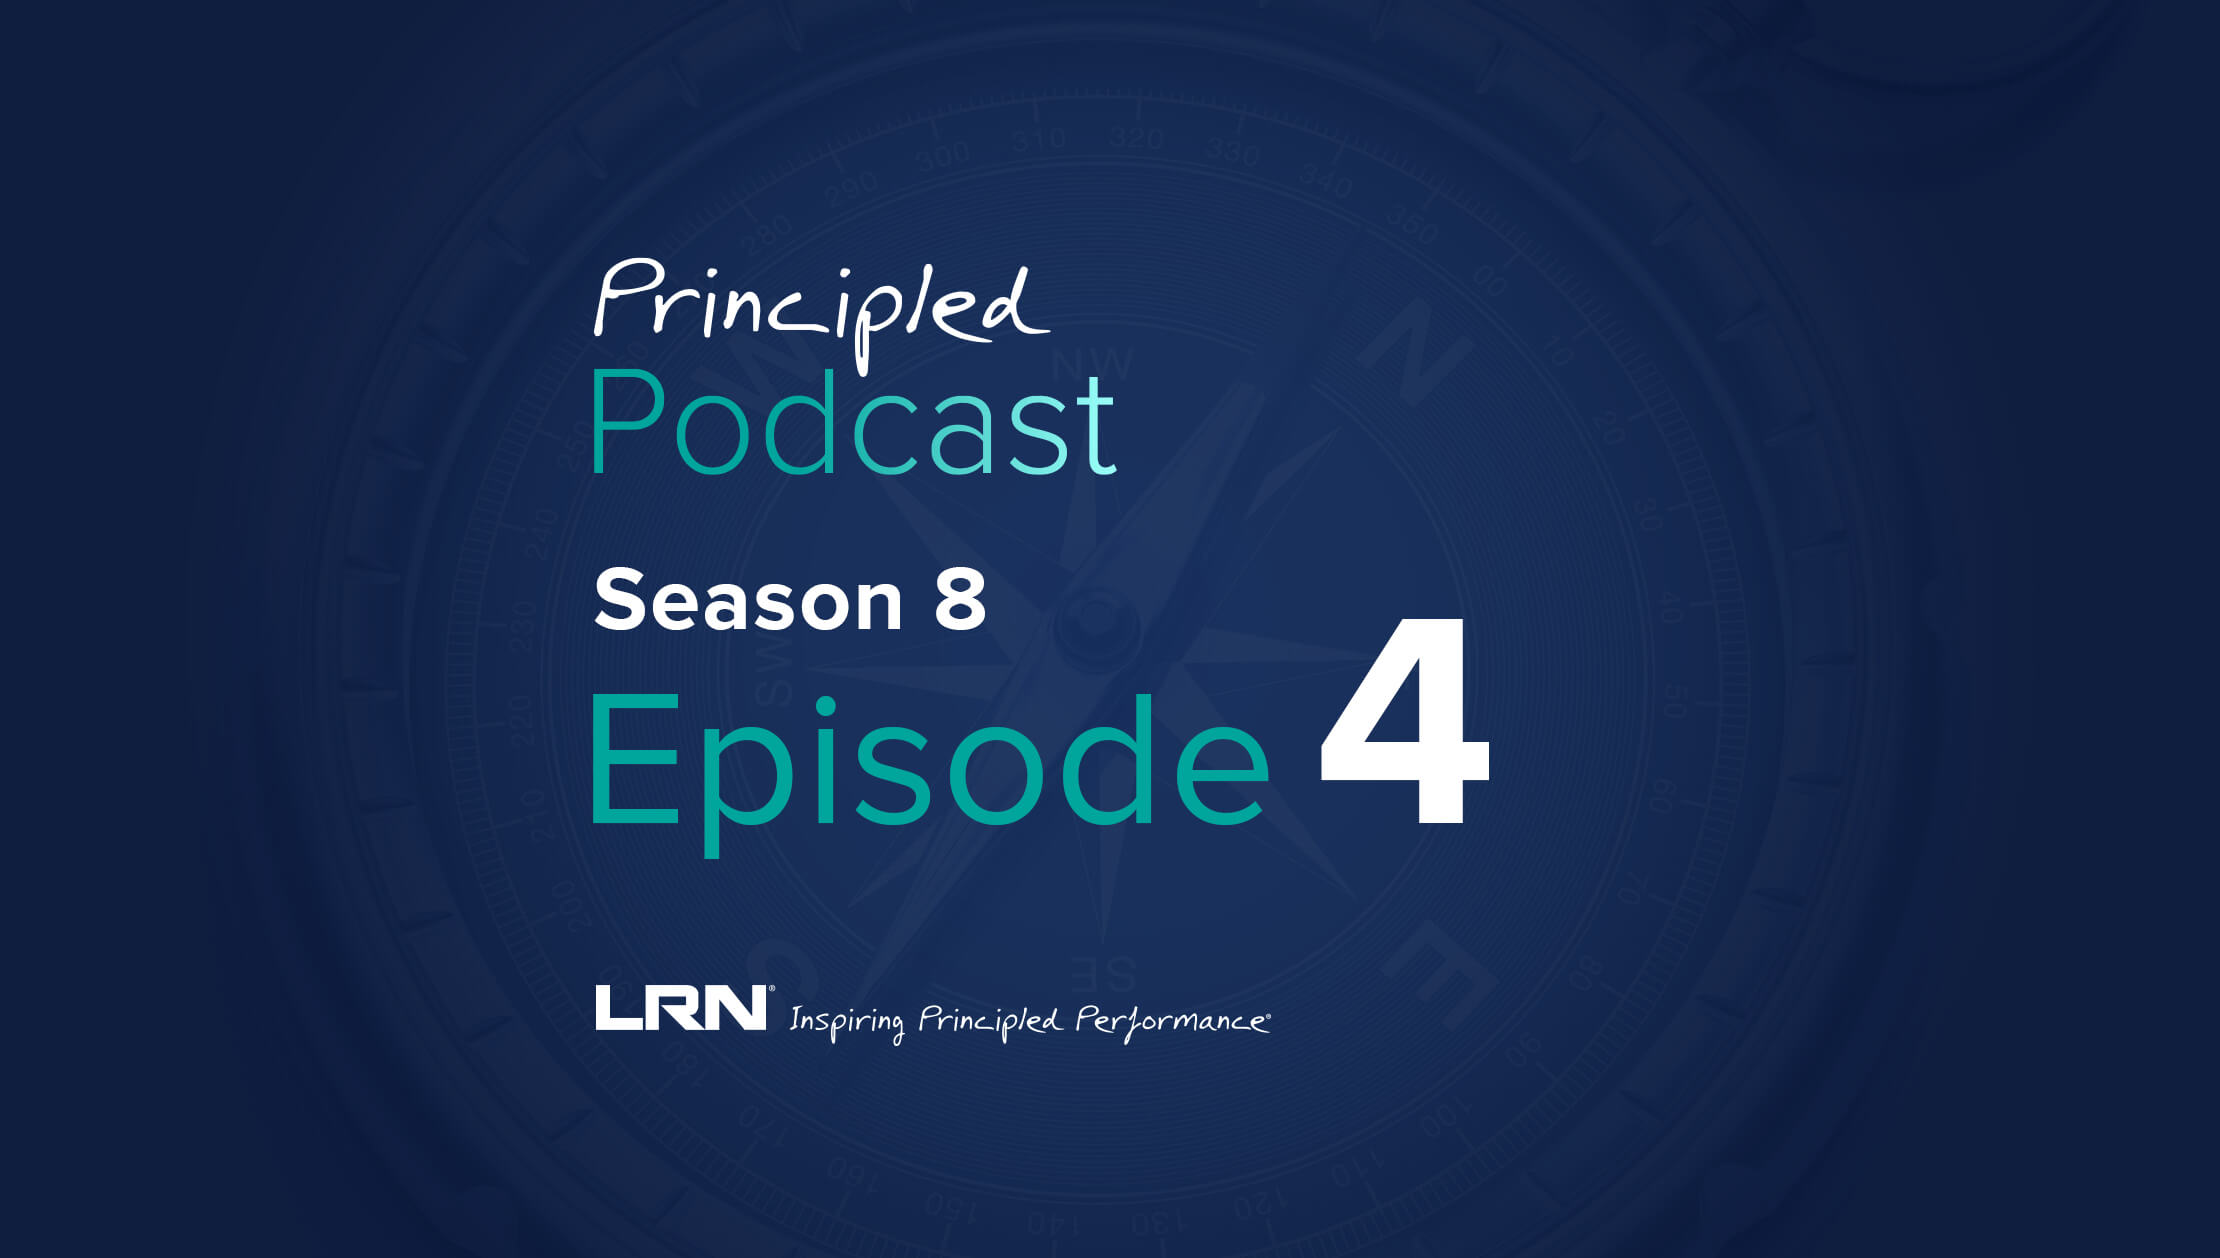 LRN Principled Podcast Season 8 Episode 4 – See something, say something: Bystander intervention training insights